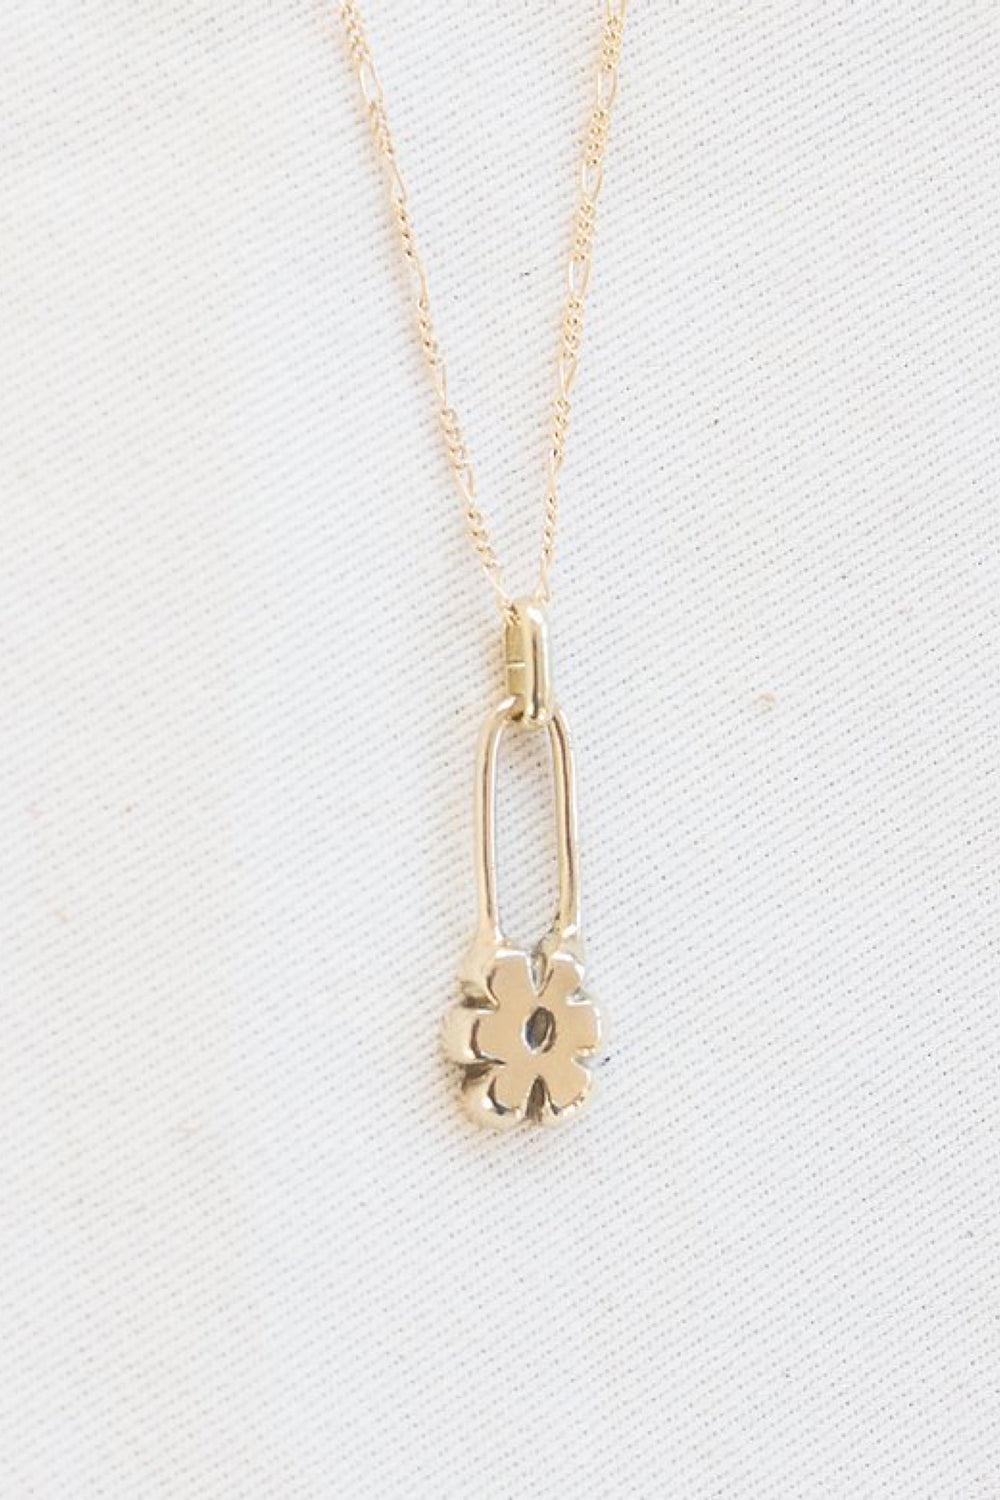 Gold Flower Pin Necklace